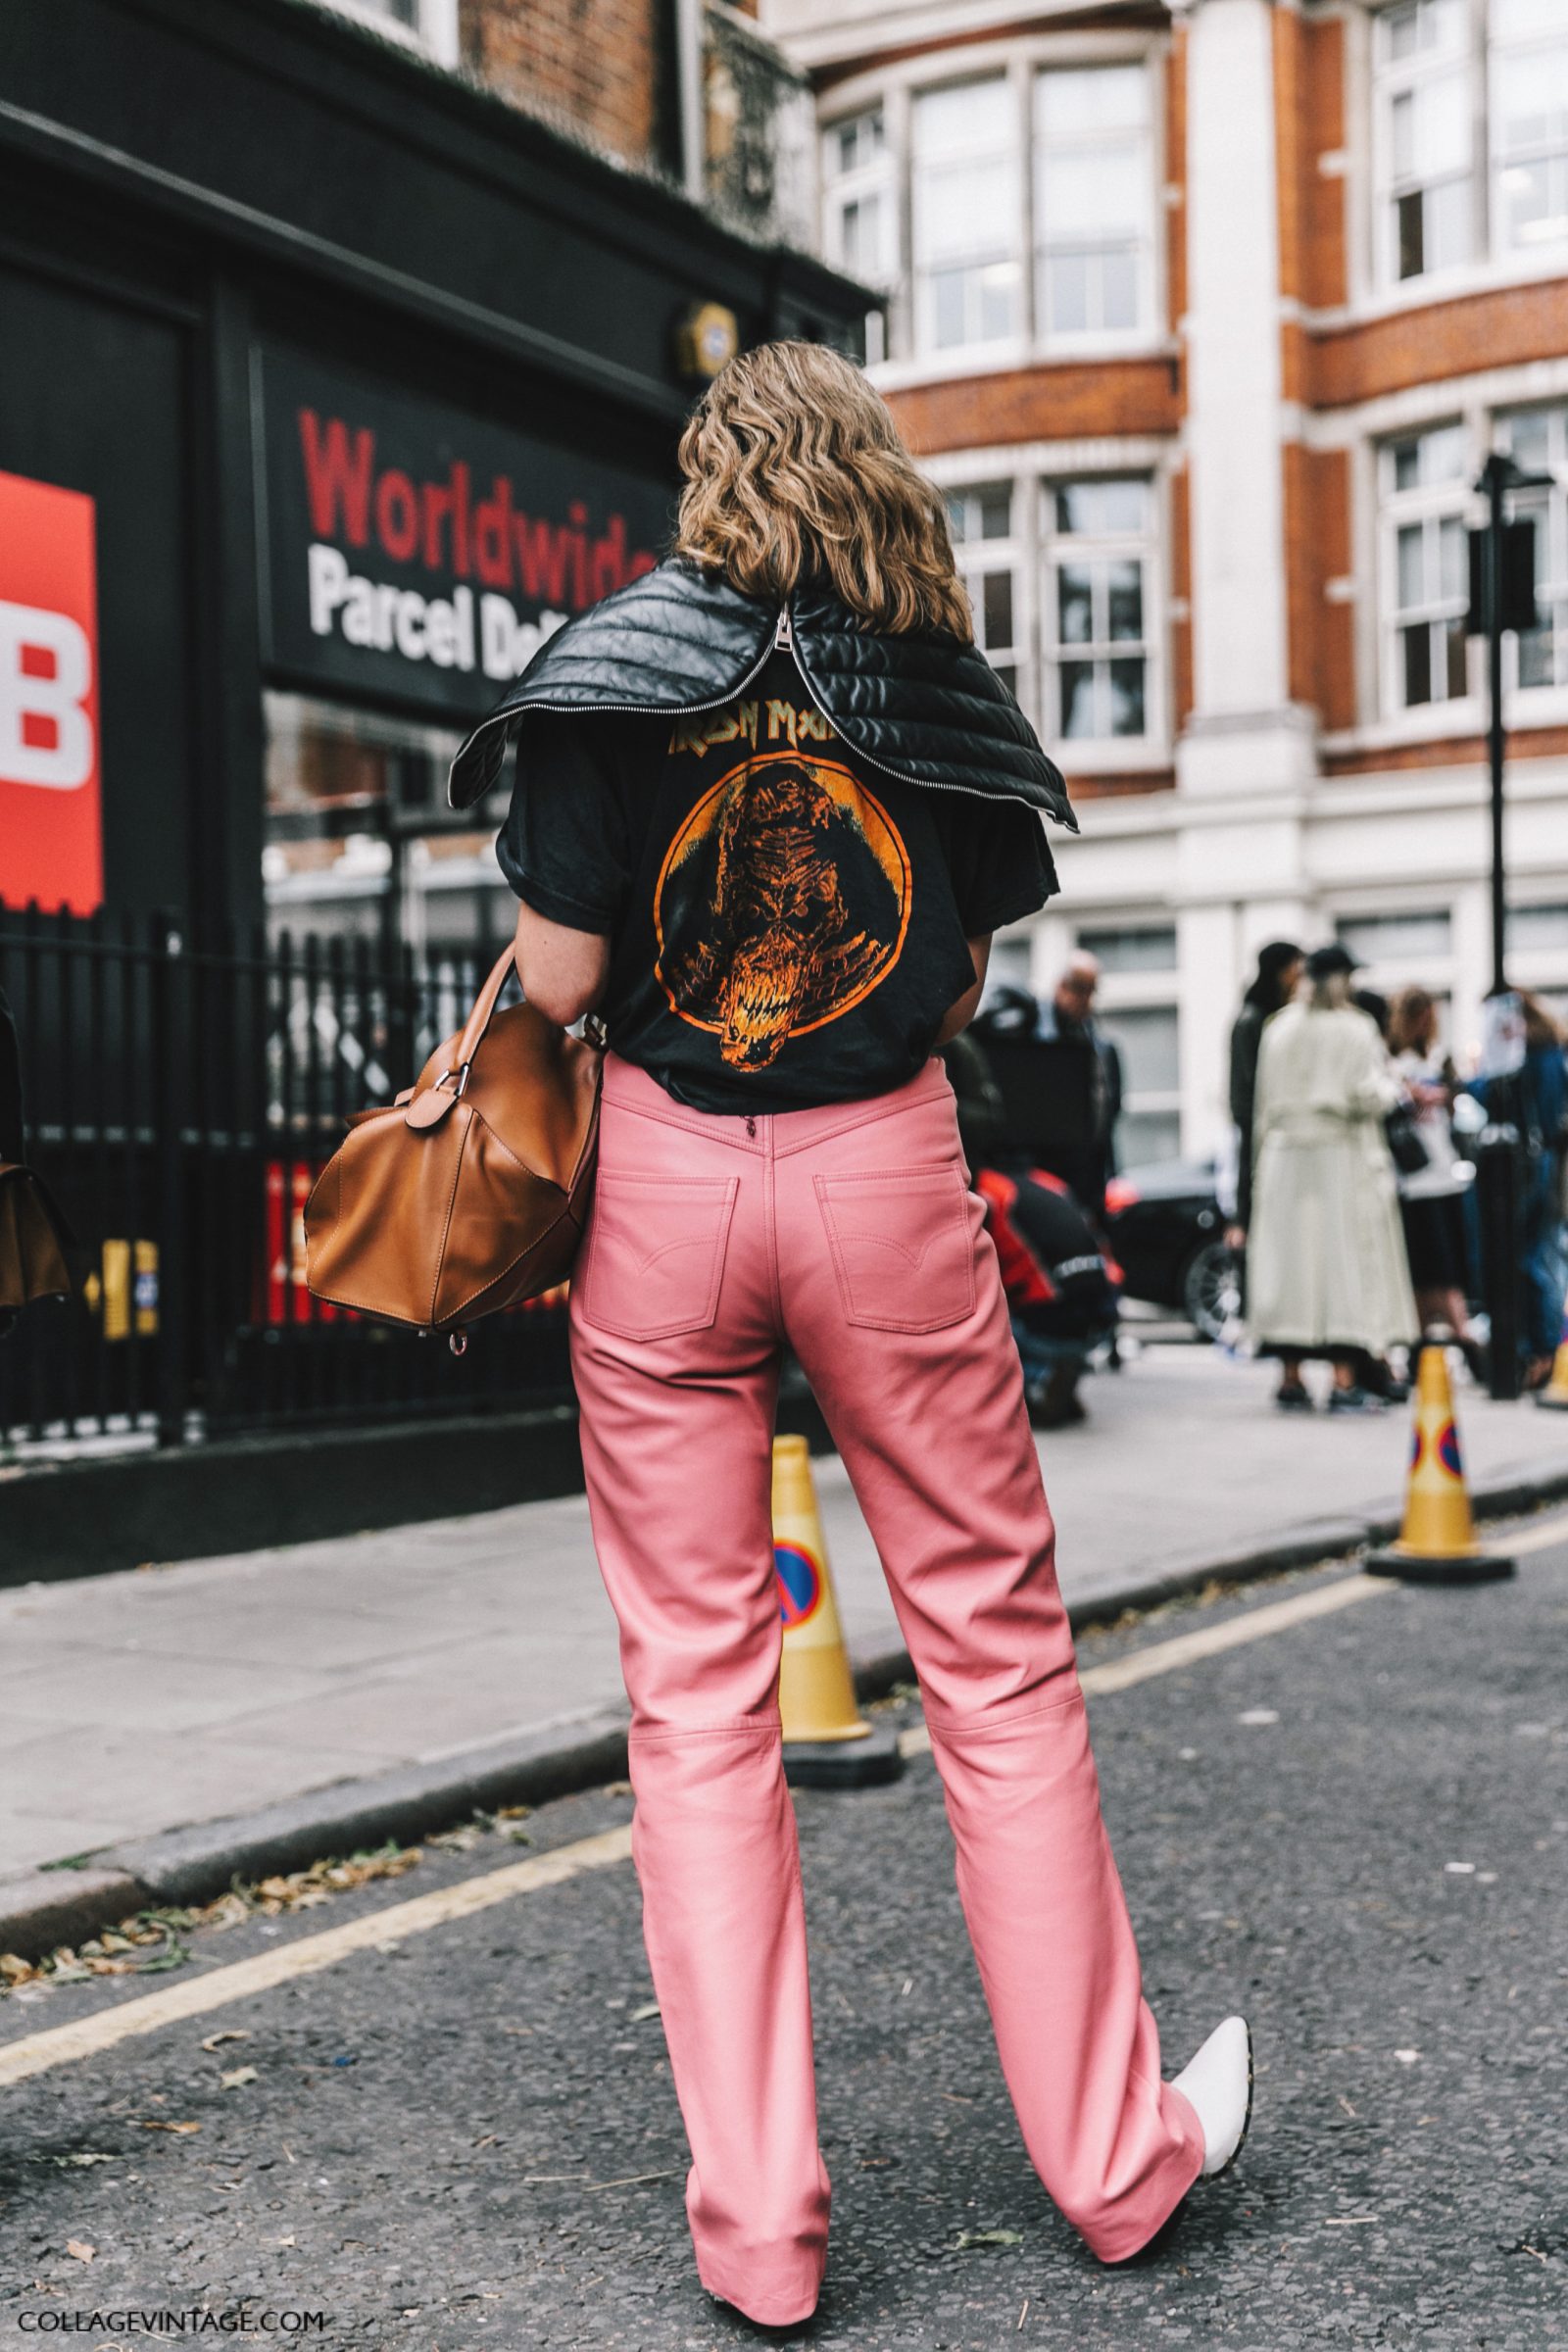 lfw-london_fashion_week_ss17-street_style-outfits-collage_vintage-vintage-jw_anderson-house_of_holland-199